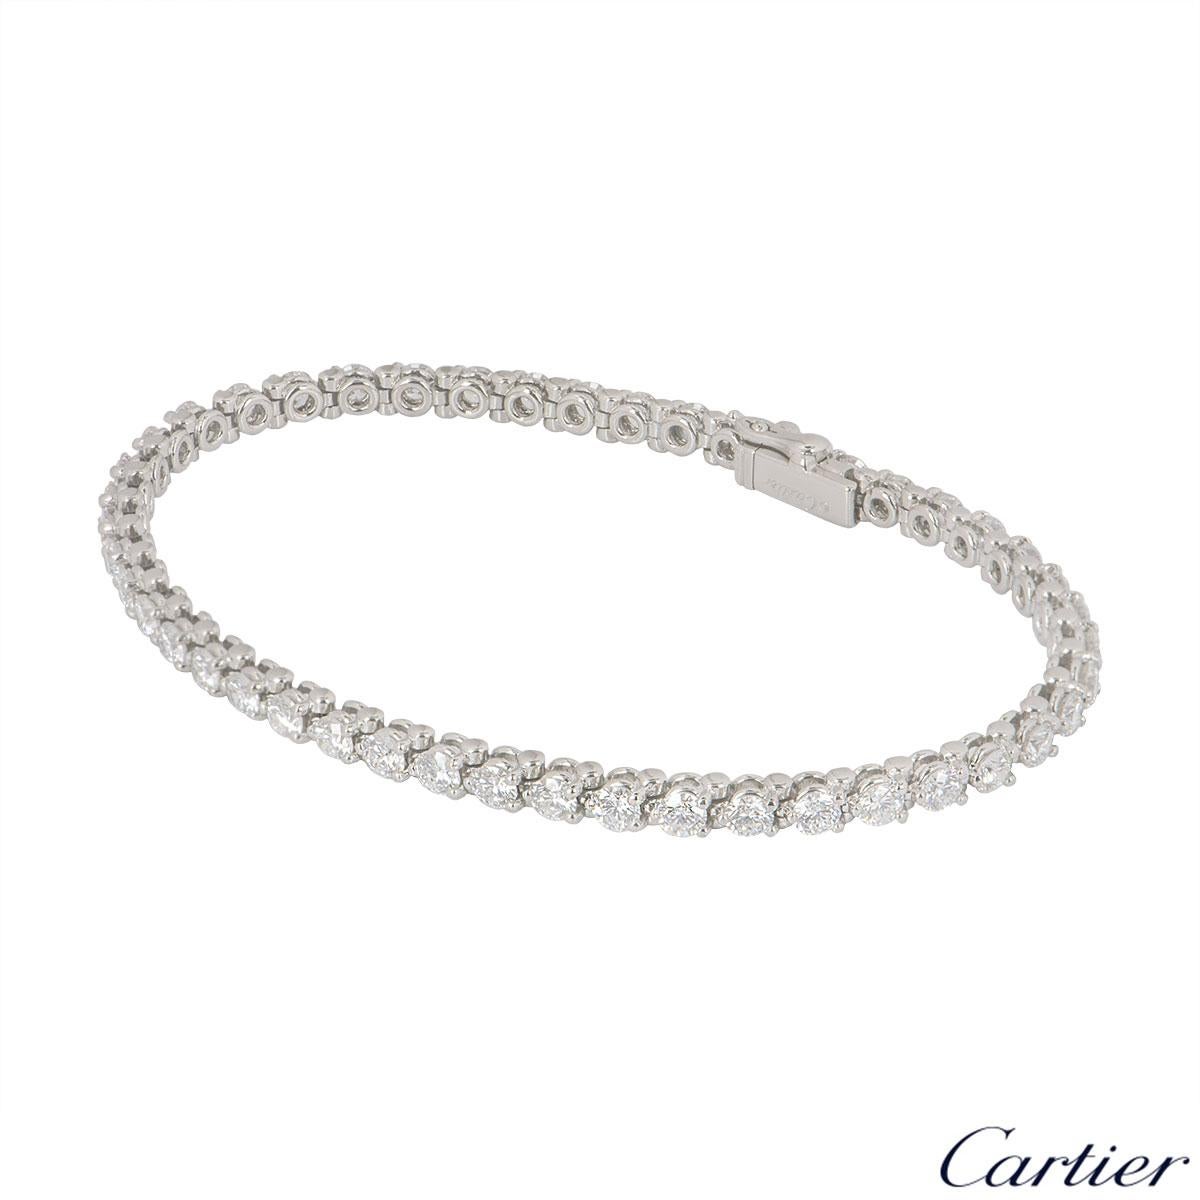 A platinum diamond line bracelet by Cartier. The bracelet features 46 round brilliant cut diamonds each individually set in a 3 claw setting with an approximate total weight of 4.60ct. The bracelet features a box clasp with a length of 6.90 inches